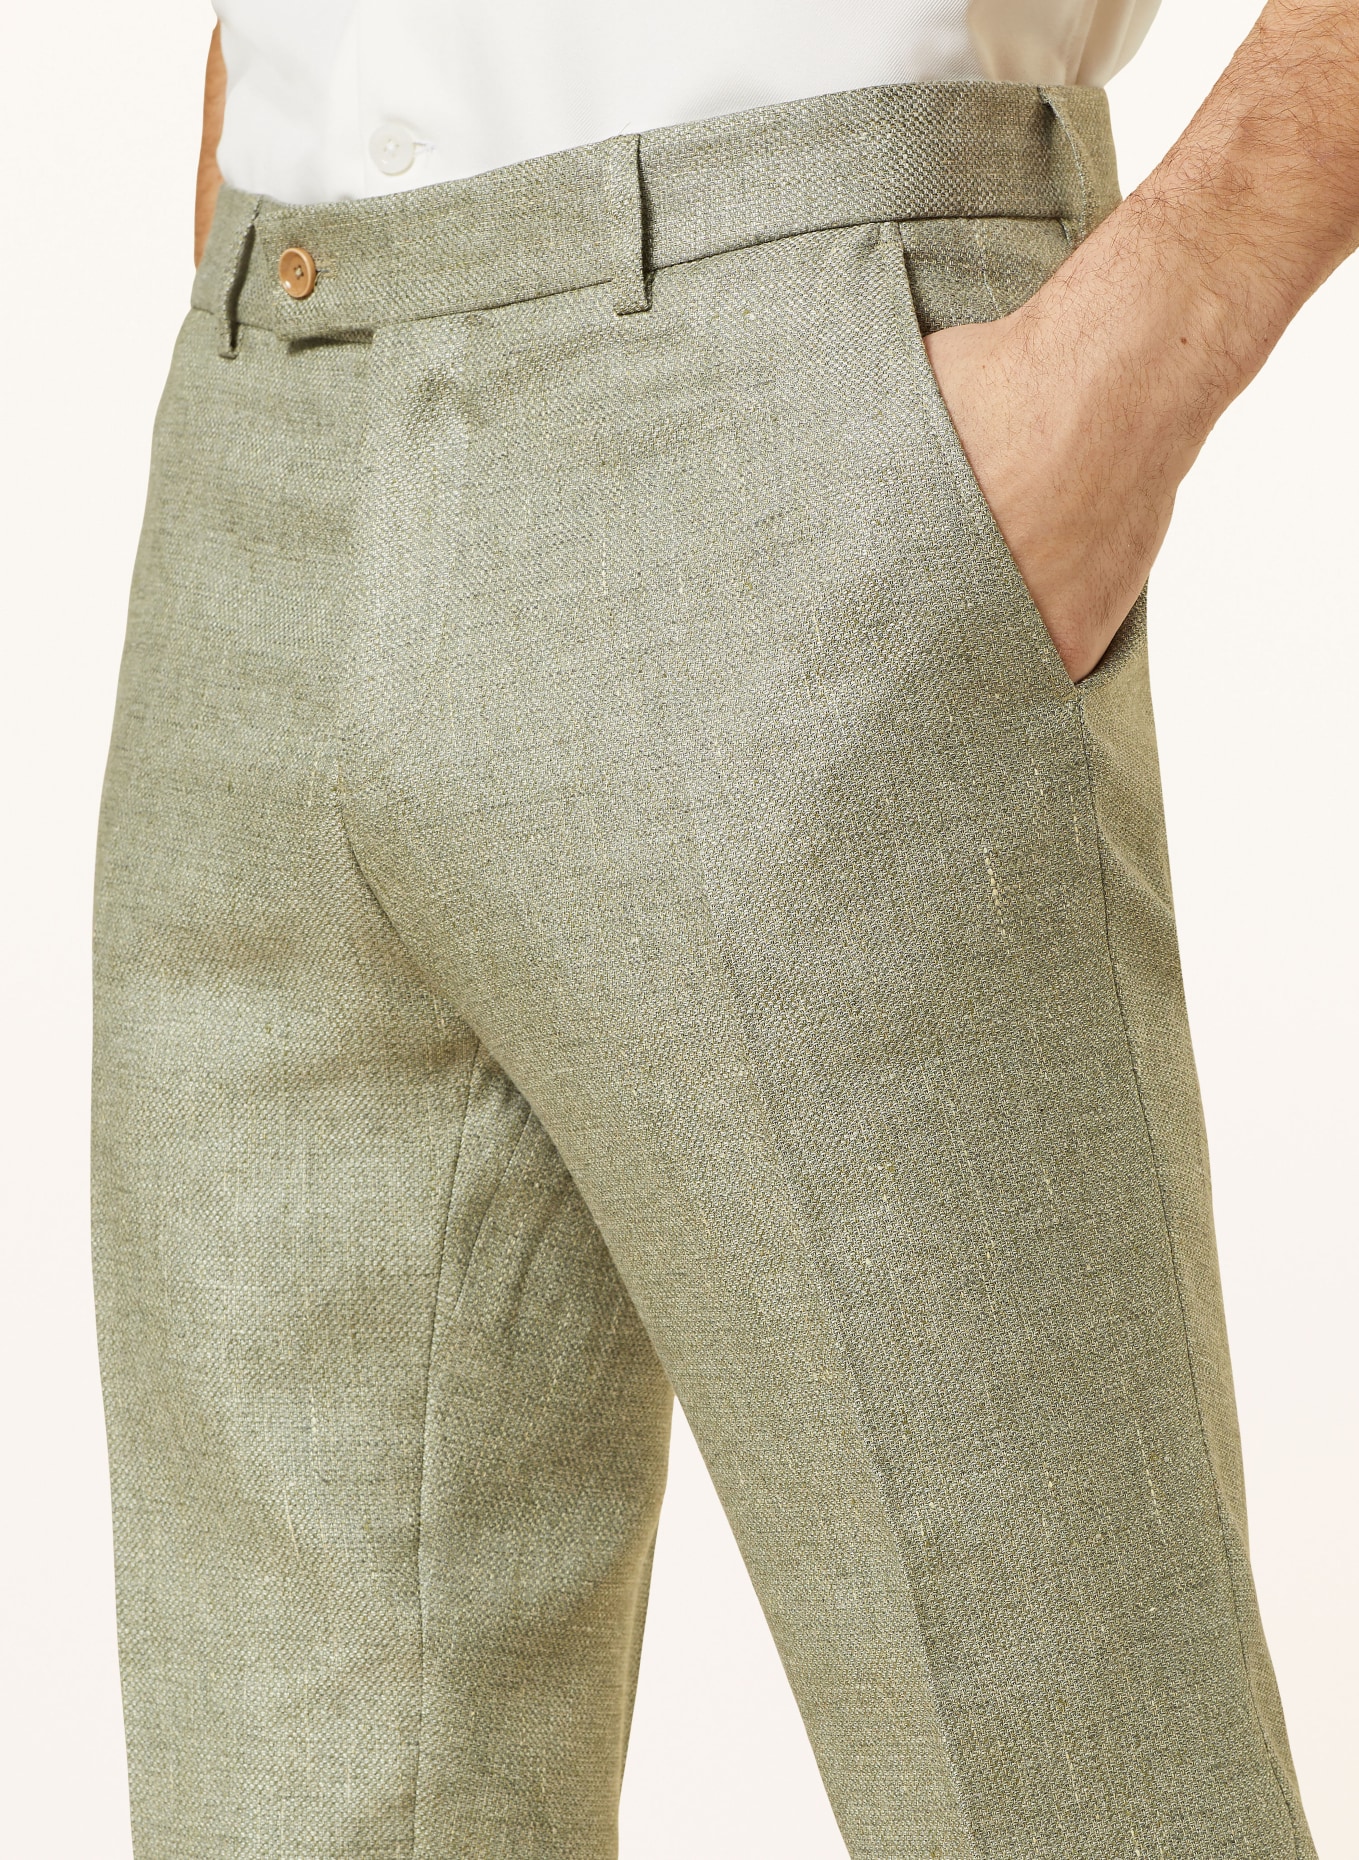 CG - CLUB of GENTS Suit trousers CG PACO slim fit with linen, Color: 52 gruen mittel (Image 6)